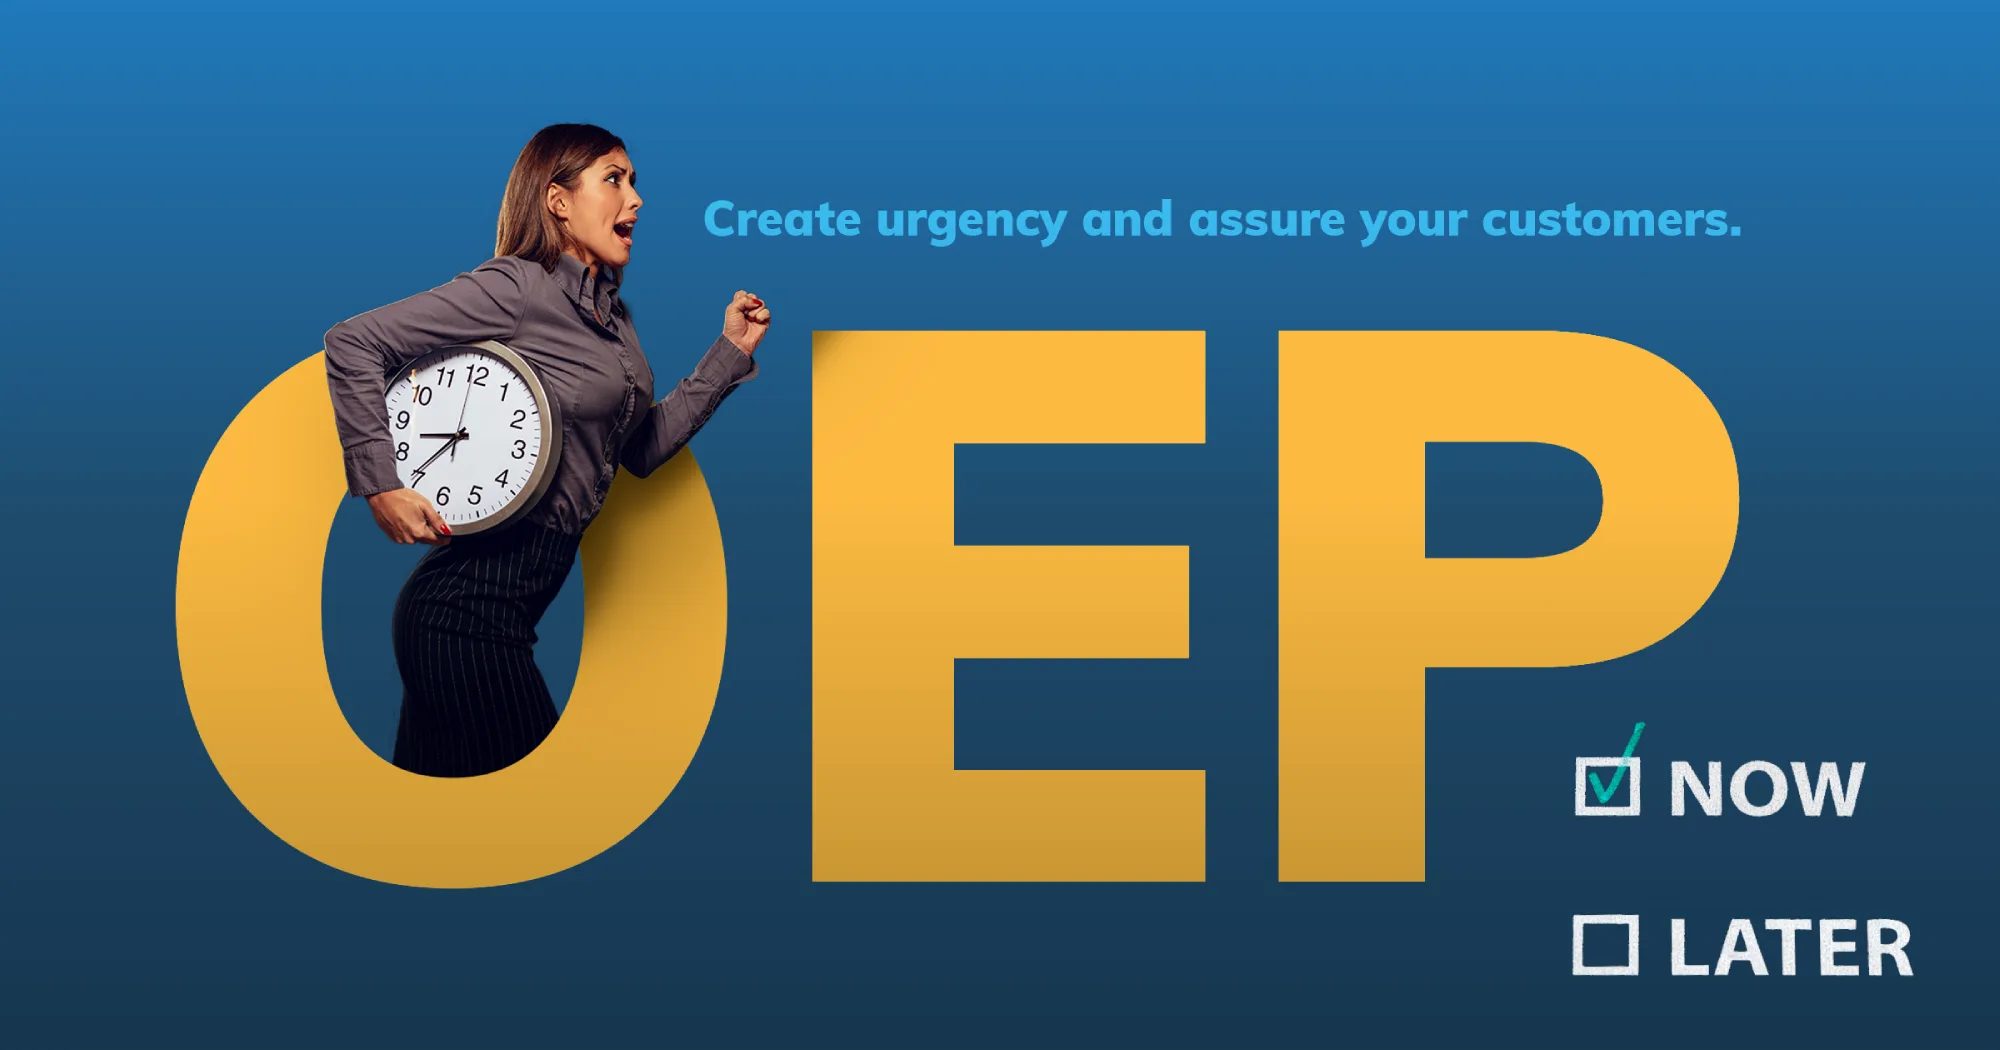 How to Build Urgency with OEP Deadlines